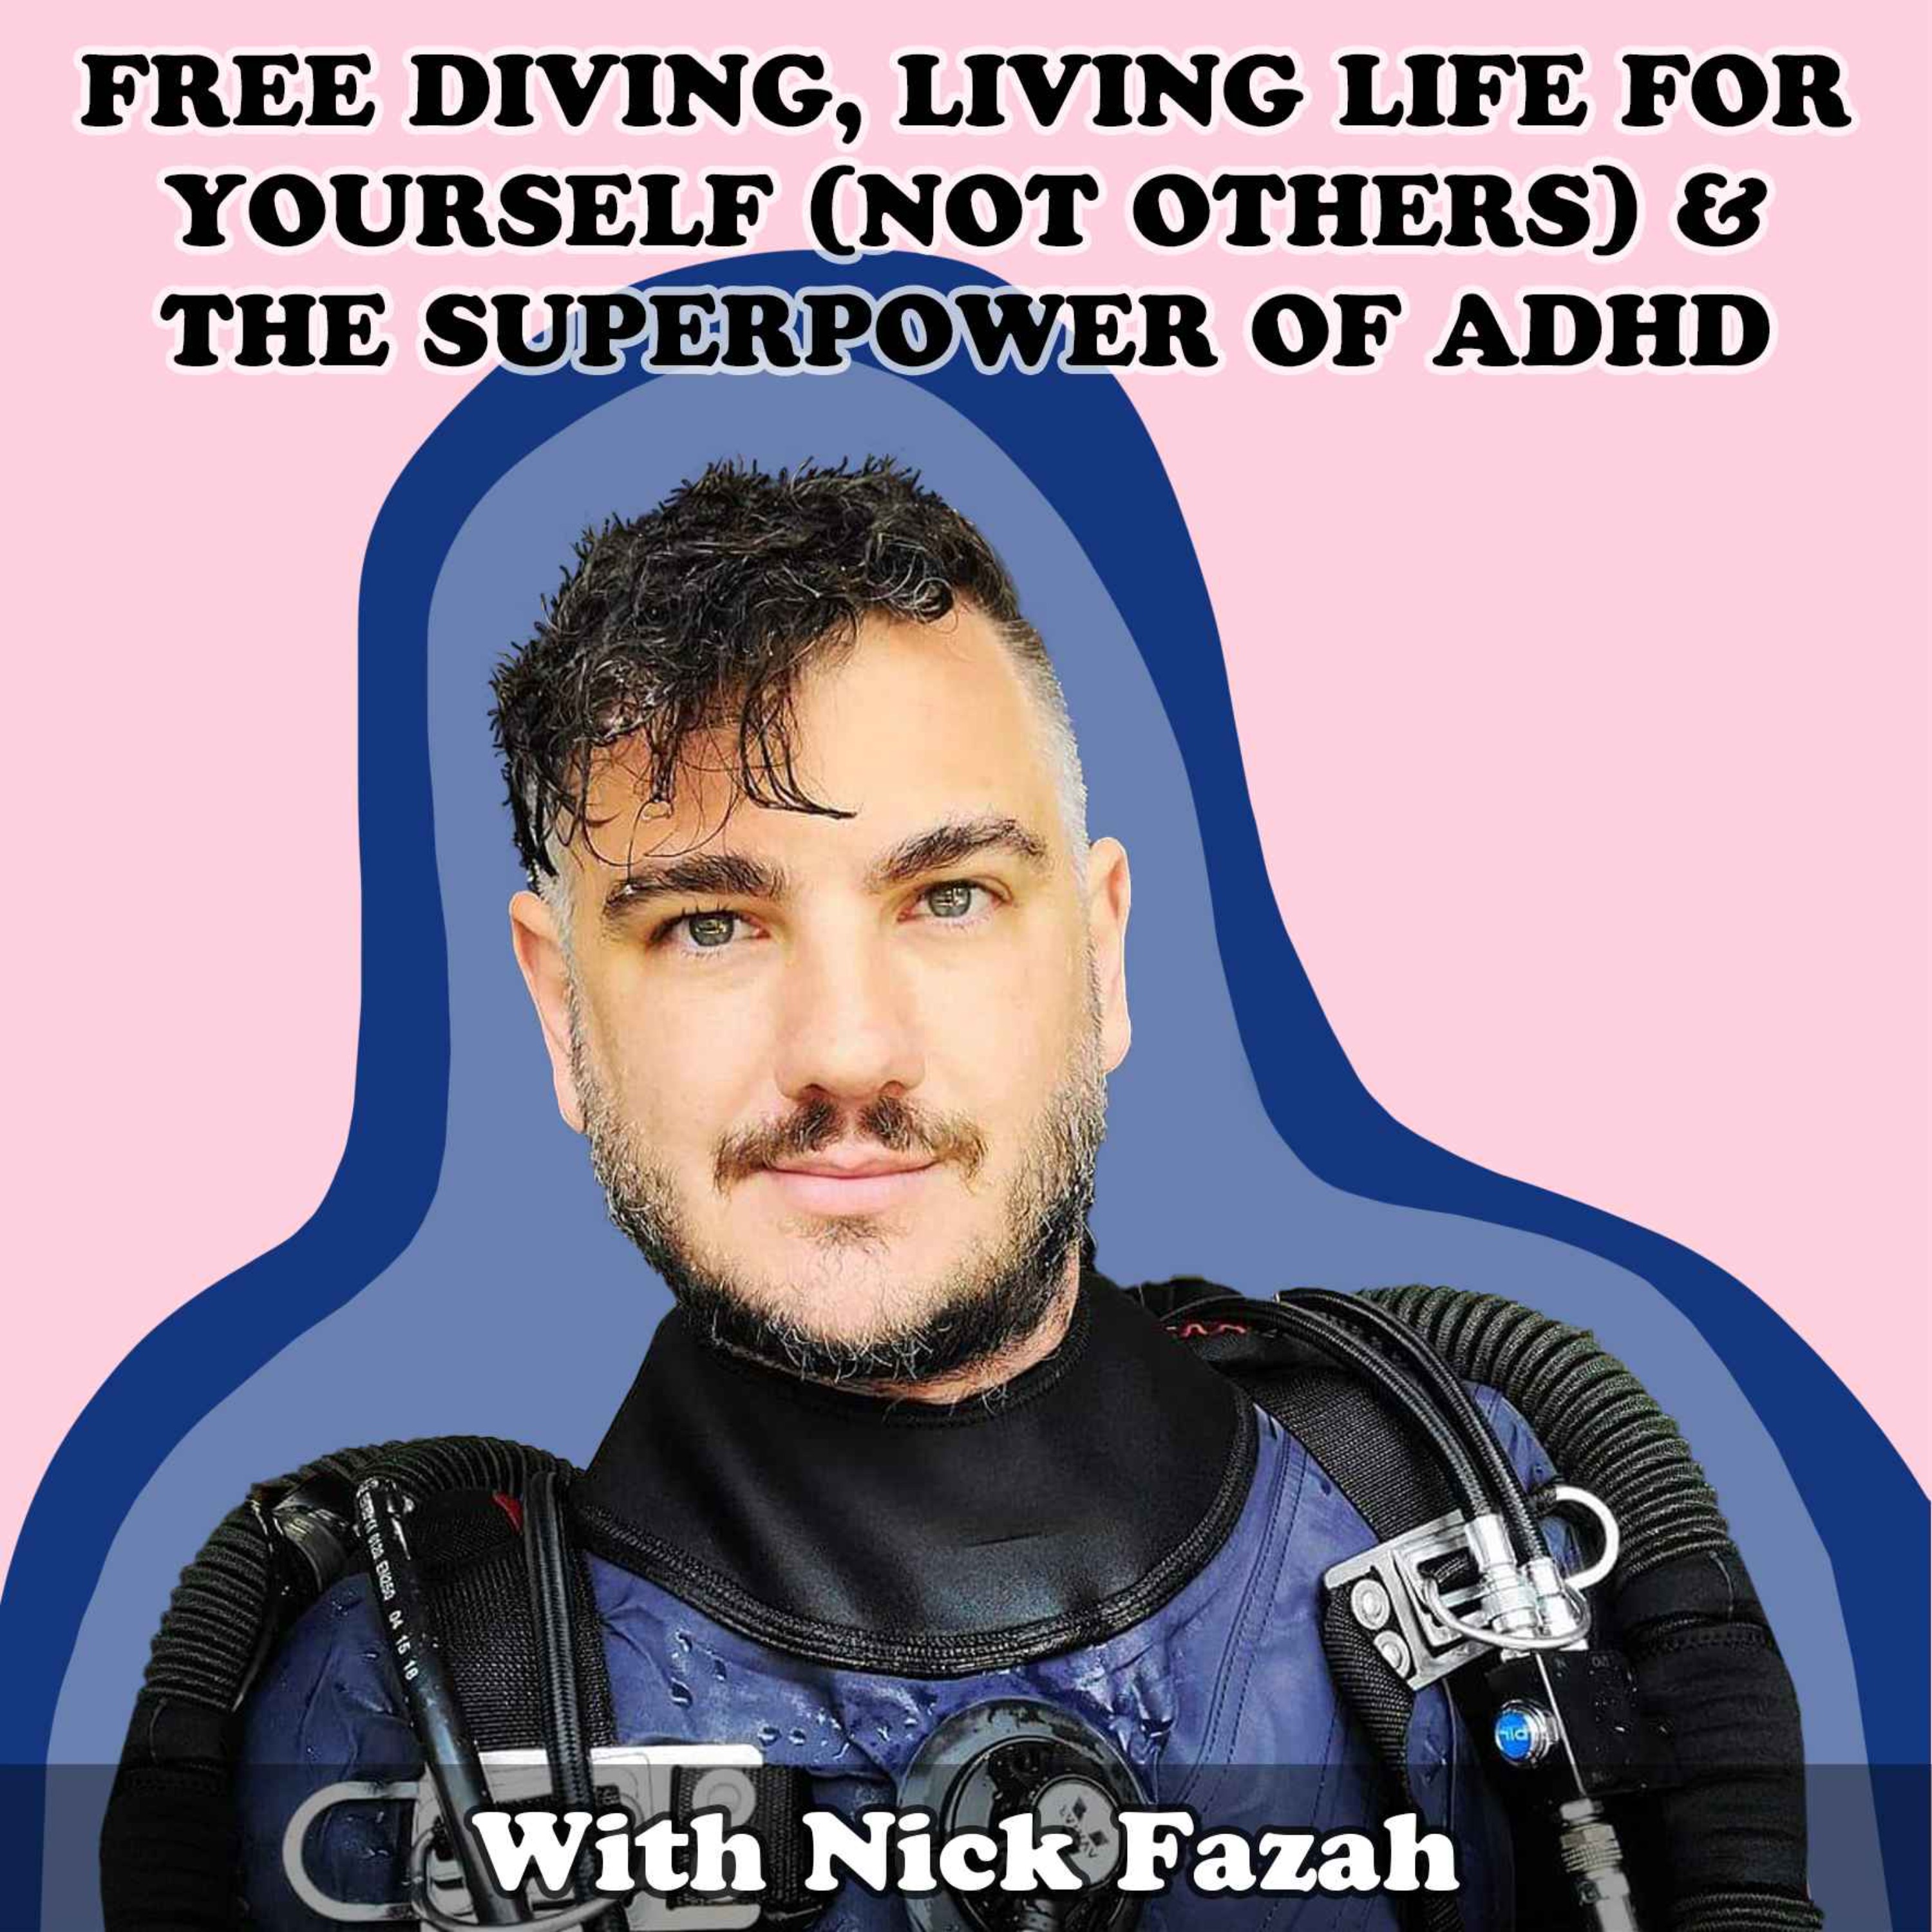 #22 Free Diving, Living Life For Yourself (Not Others) & The Superpower of ADHD with Nick Fazah